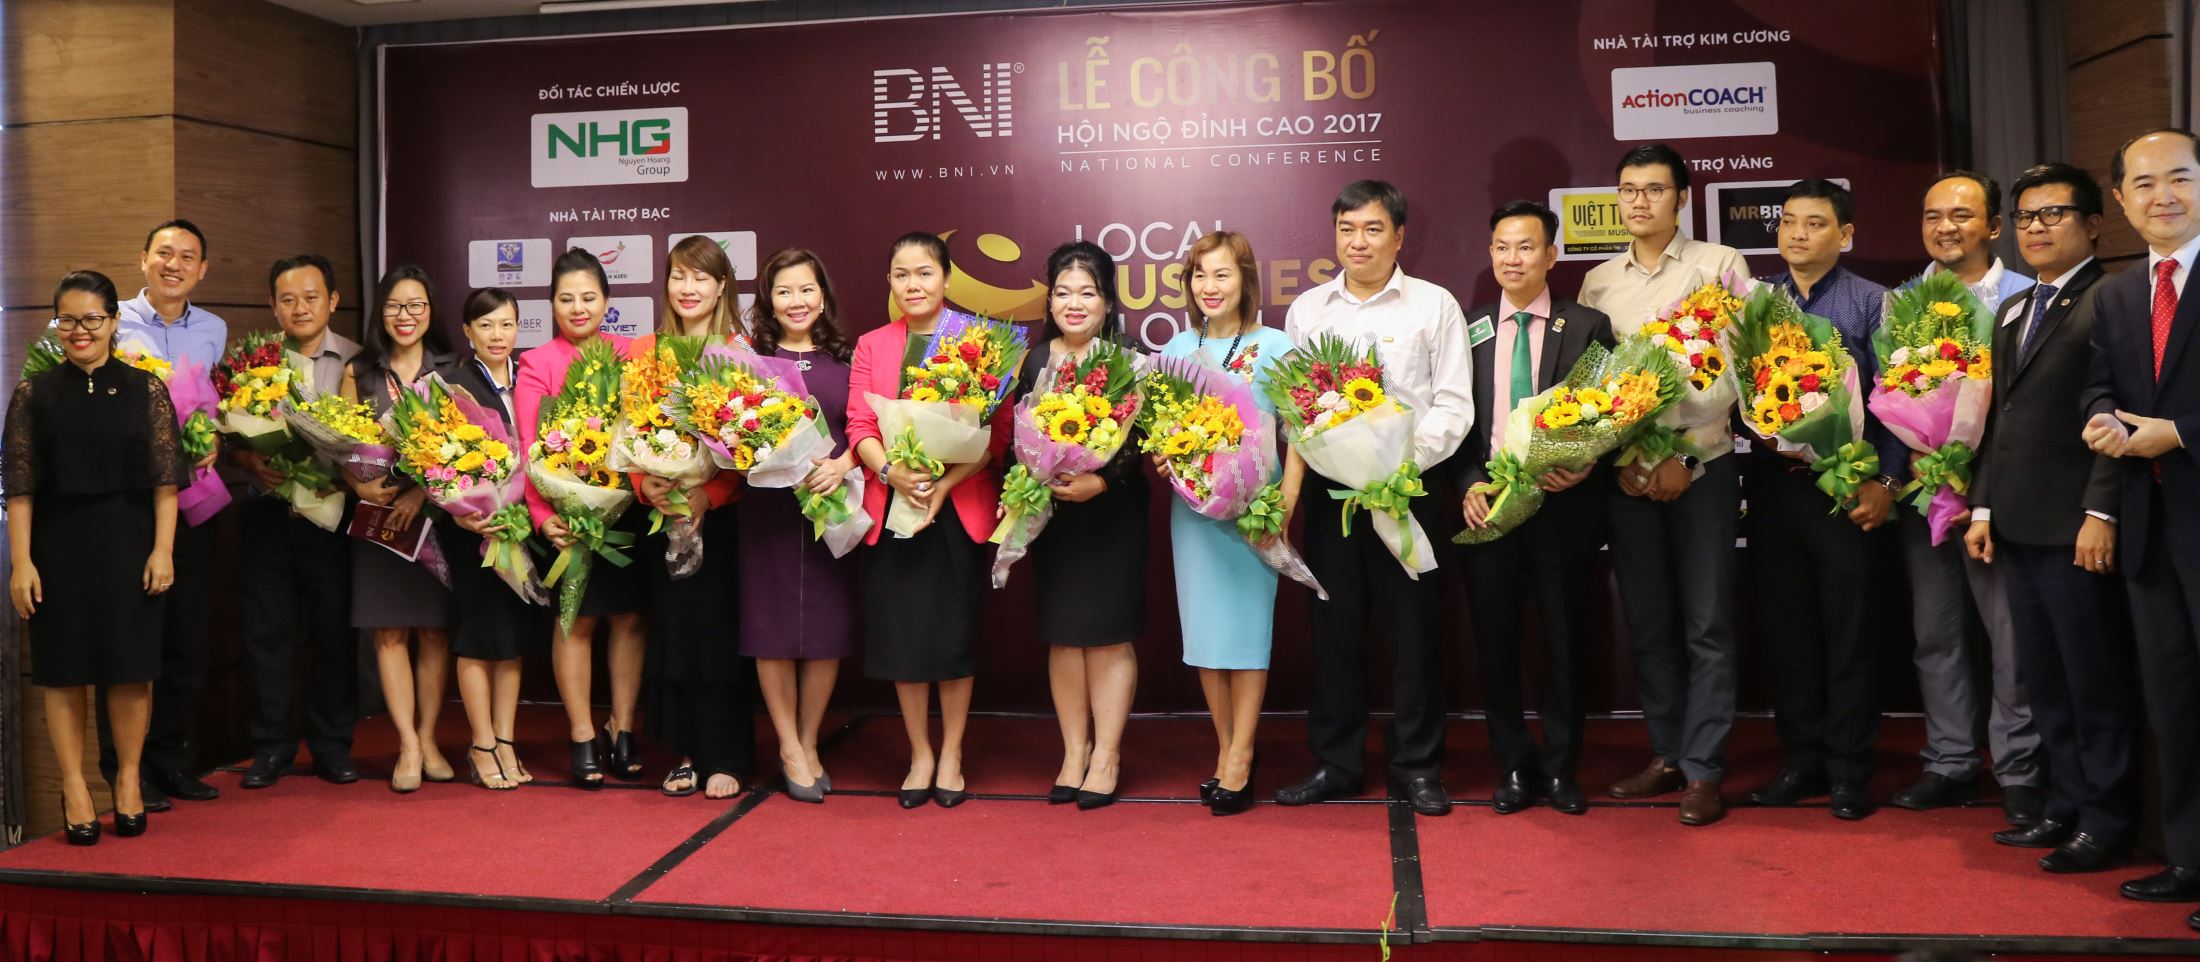 Ms. Hoang Nguyen Thu Thao, CEO of NHG, Mr. Ho Quang Minh, Chairman of BNI Vietnam and BNI's regional leaders at the event.